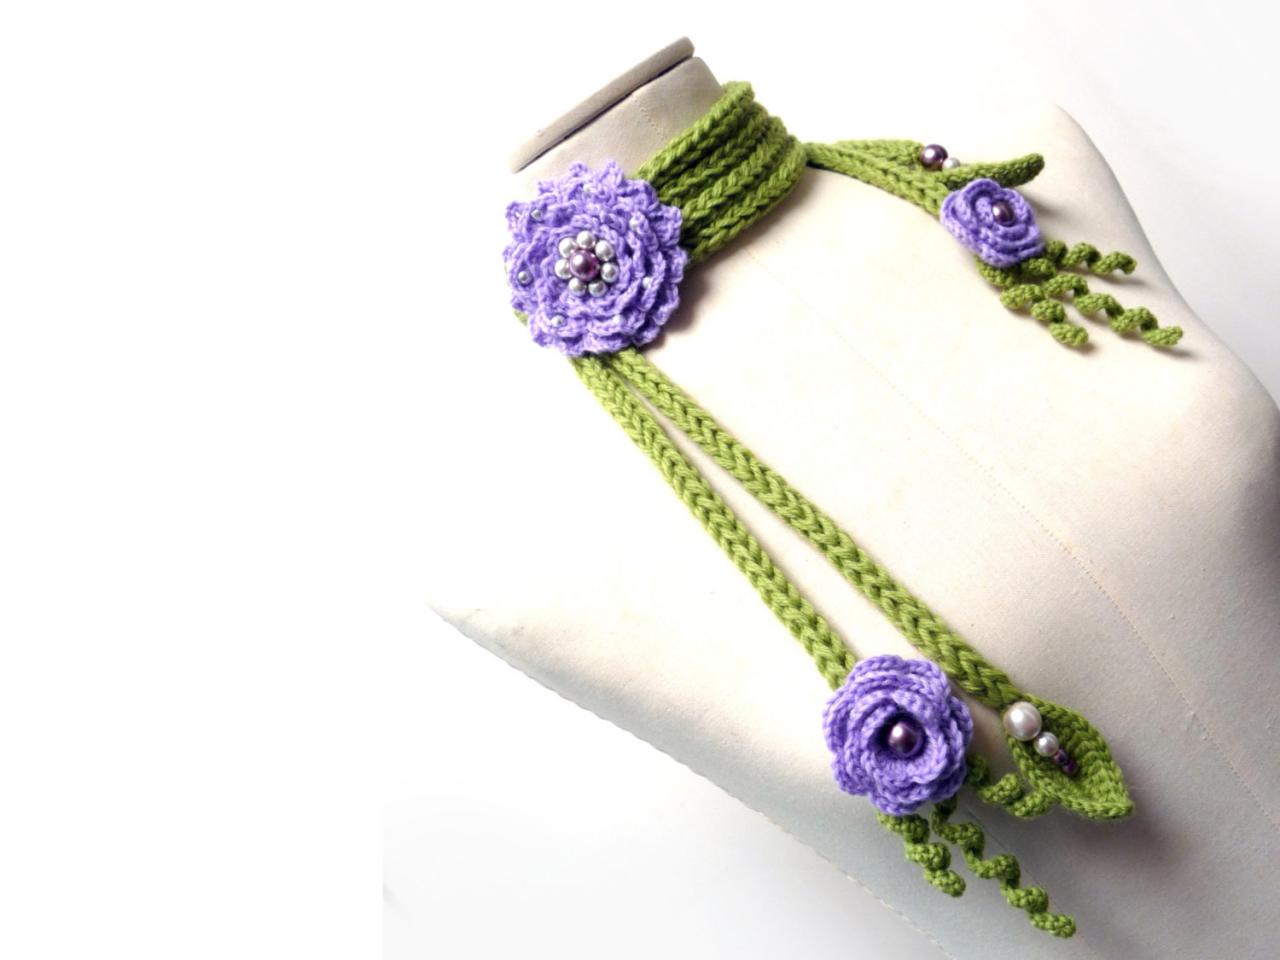 Crochet And Knit Scarf Necklace Or Neckwarmer With Flowers, Leaves And Glass Pearls - Made To Order - Choose Your Colors - Peony